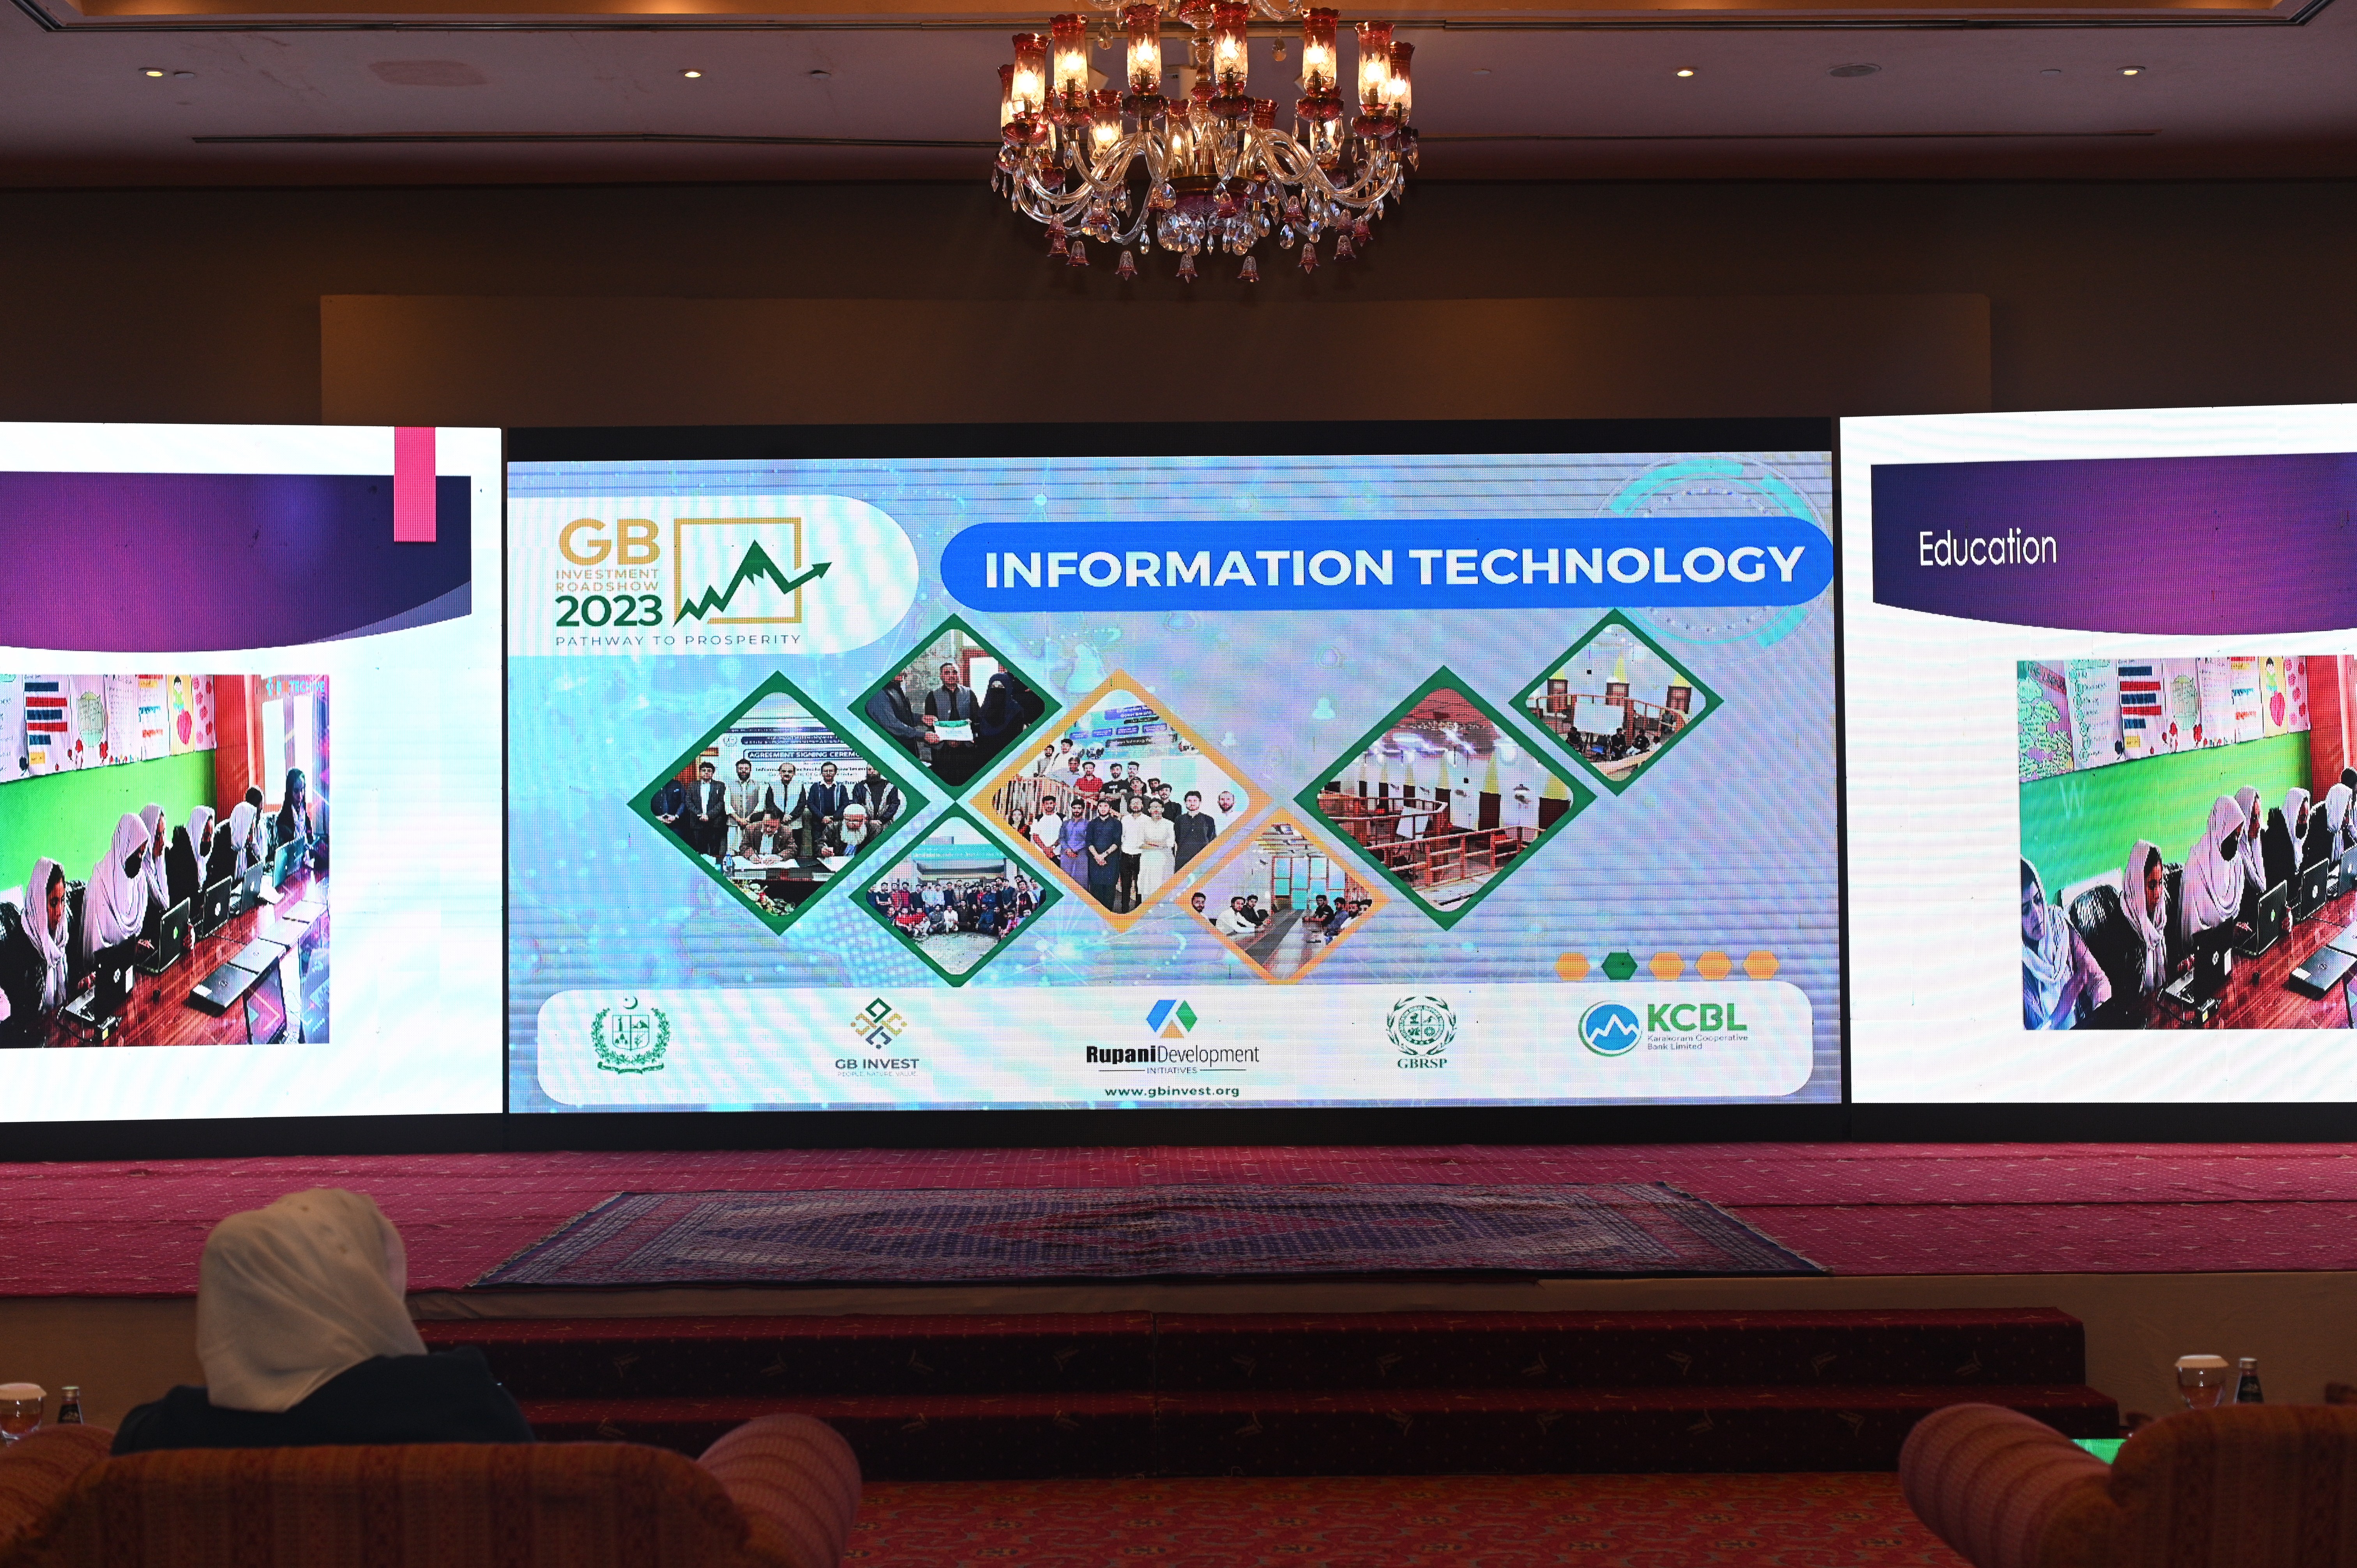 A projector displaying the Information Technology sector of  GB Investment roadshow